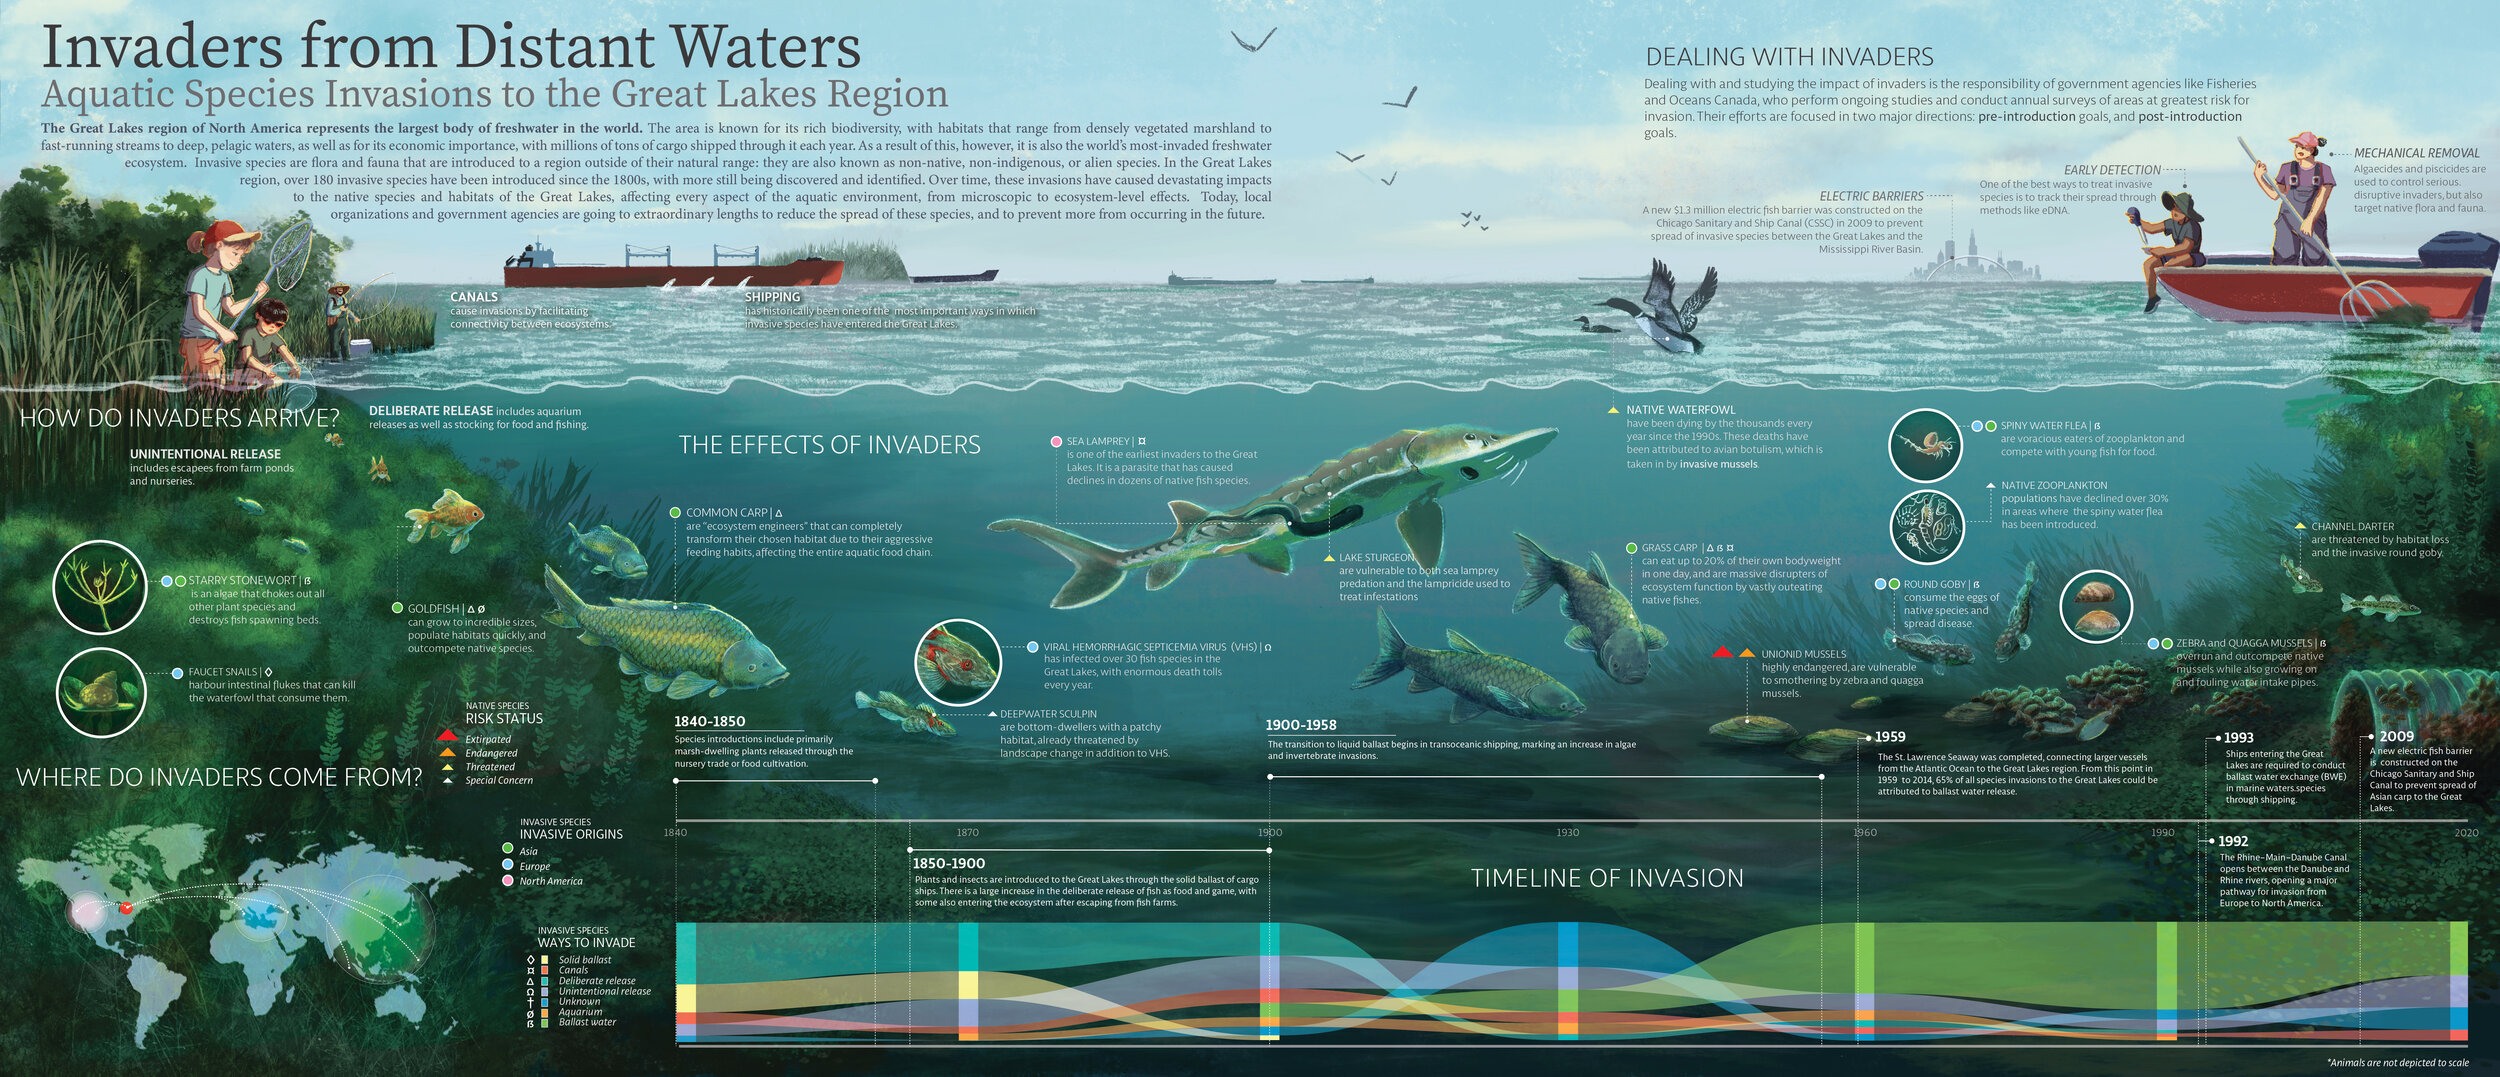 Invaders from Distant Waters: Infographic on aquatic species invasion to the Great Lakes region.